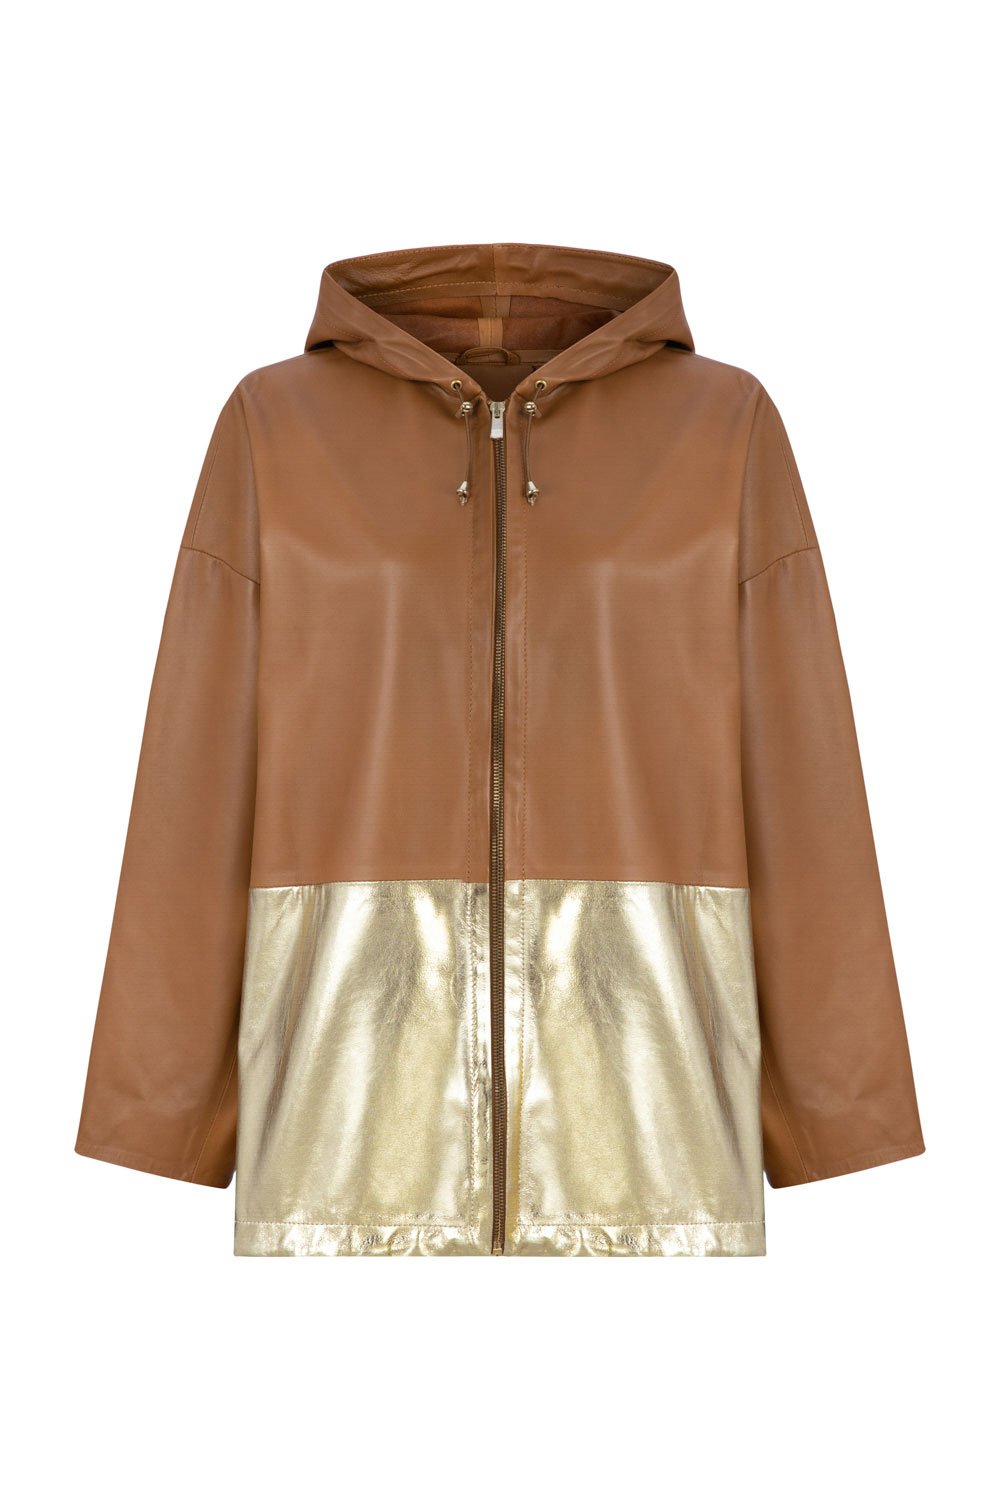 LEATHER HOODIE GINGER-GOLD